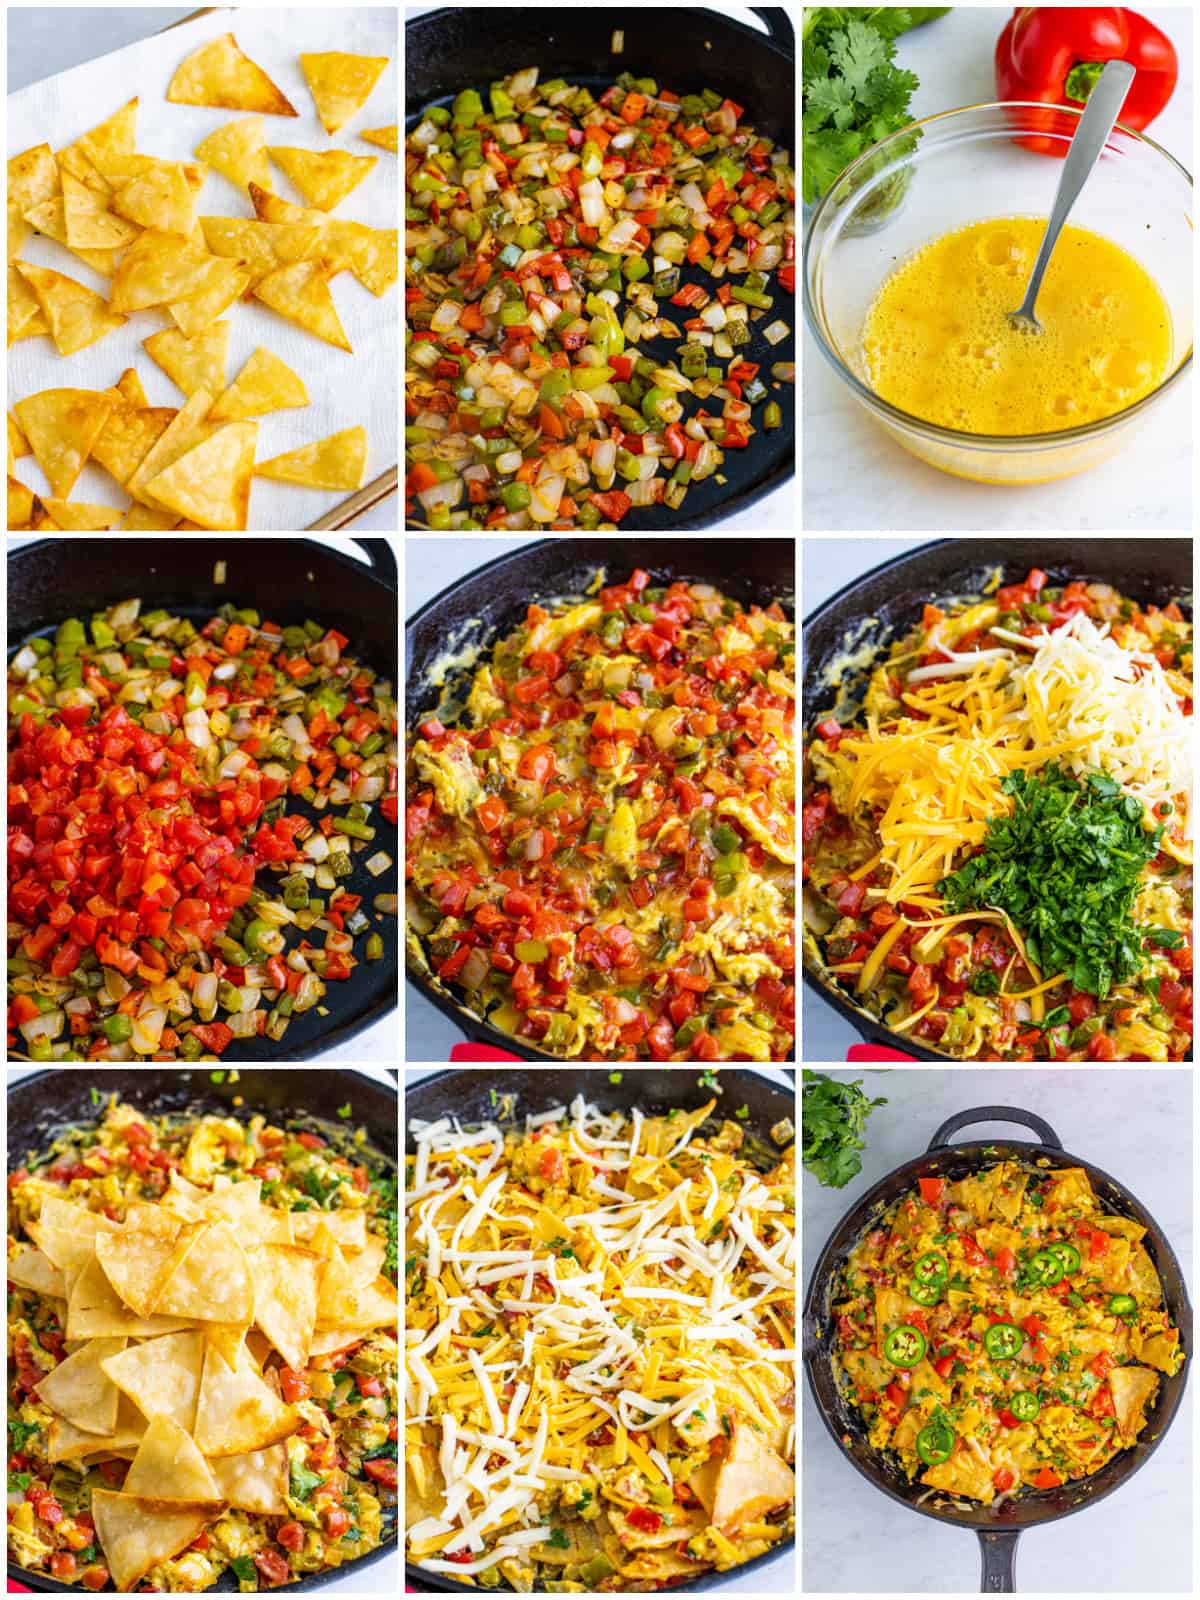 Step by step photos on how to make a Migas Recipe.